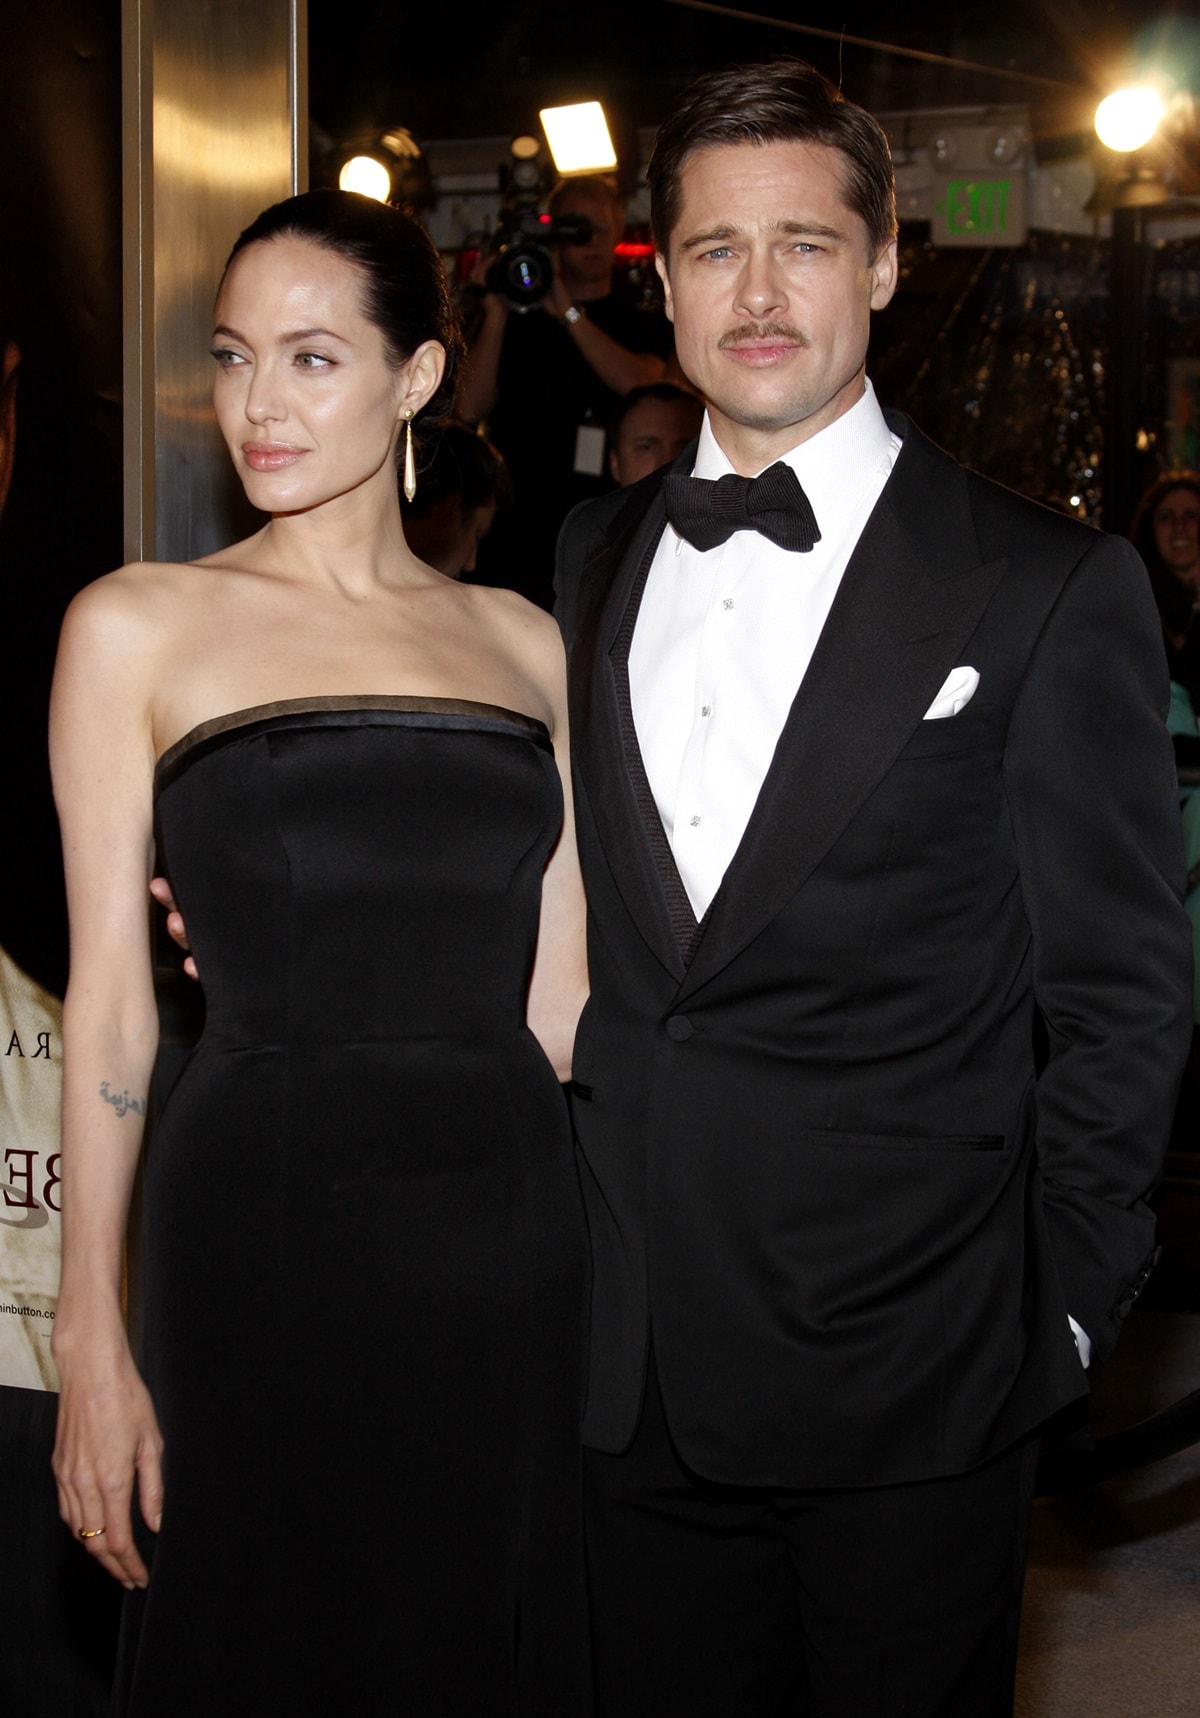 Brad Pitt and Angelina Jolie were married for two years, tying the knot on August 23, 2014, at their estate in Correns, France, before filing for divorce on September 20, 2016